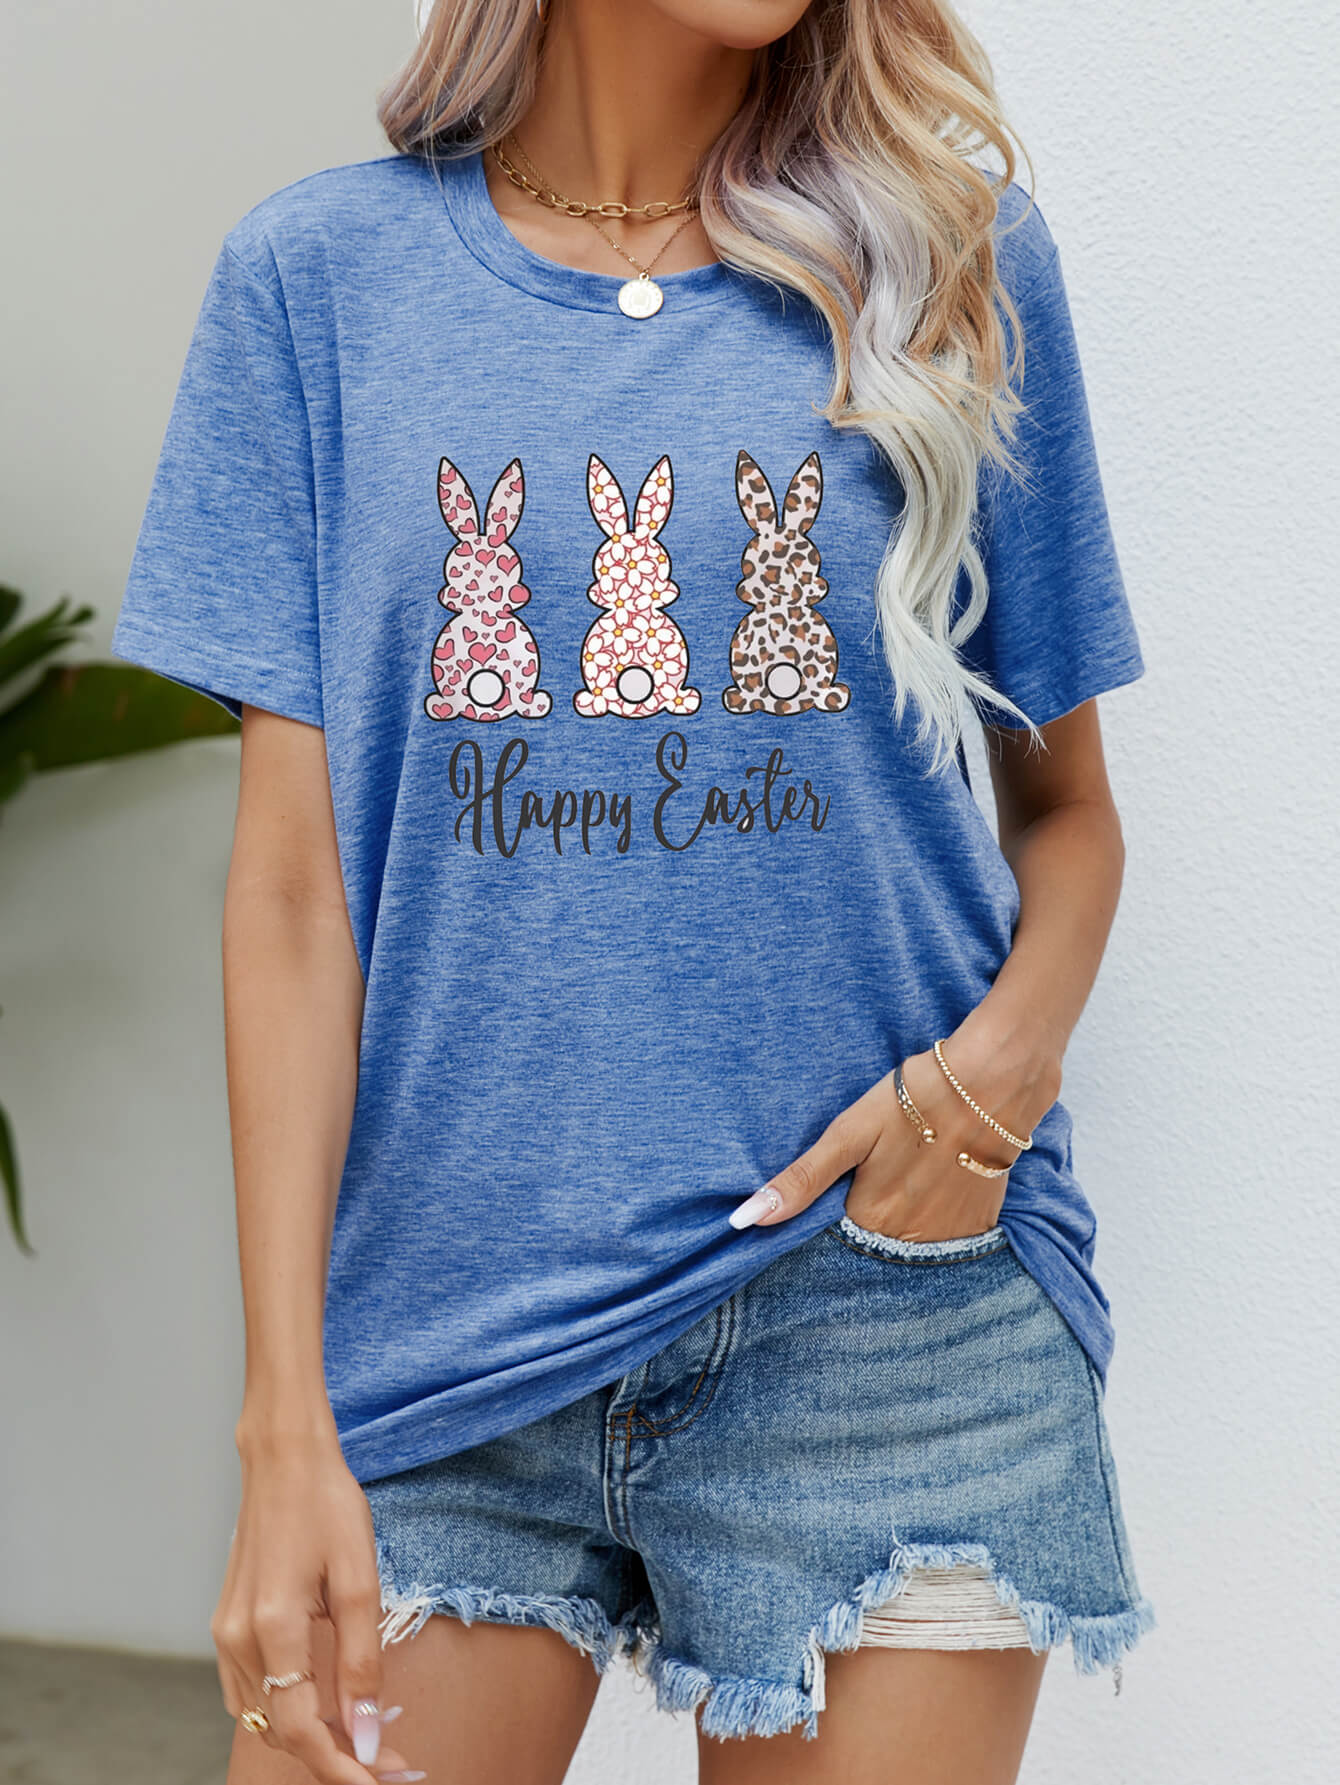 HAPPY EASTER Graphic Short Sleeve Tee